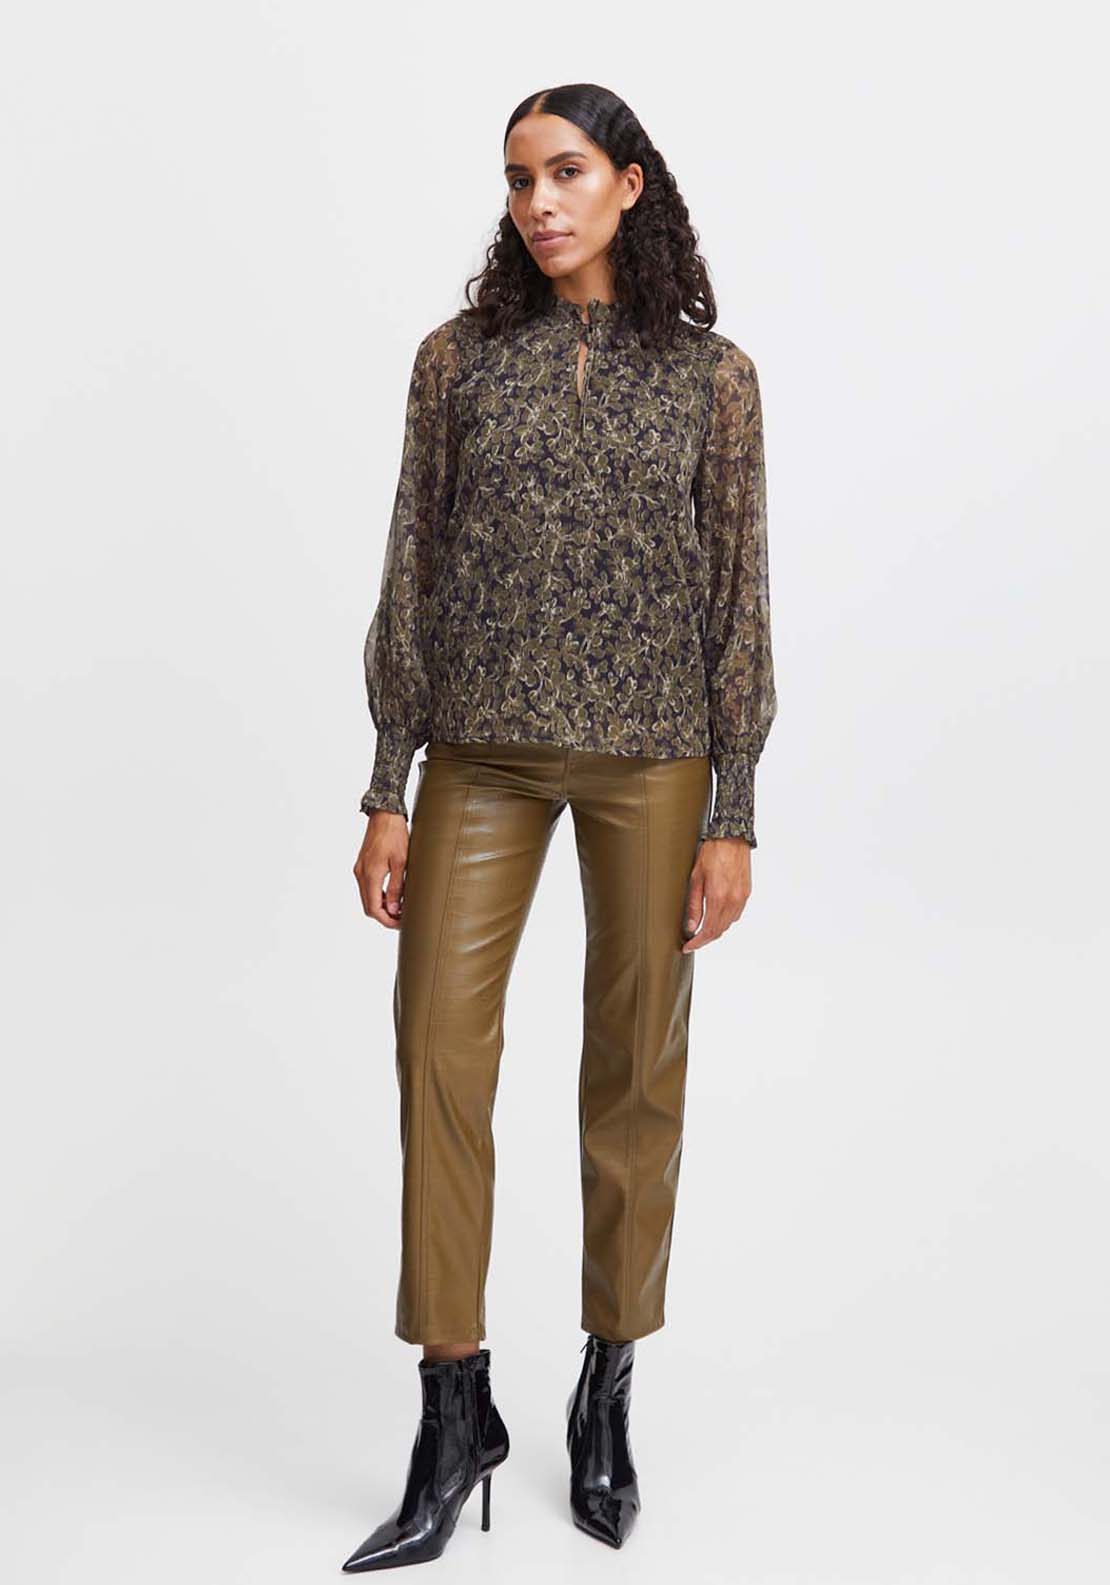 B. Young Hima Blouse 5 Shaws Department Stores